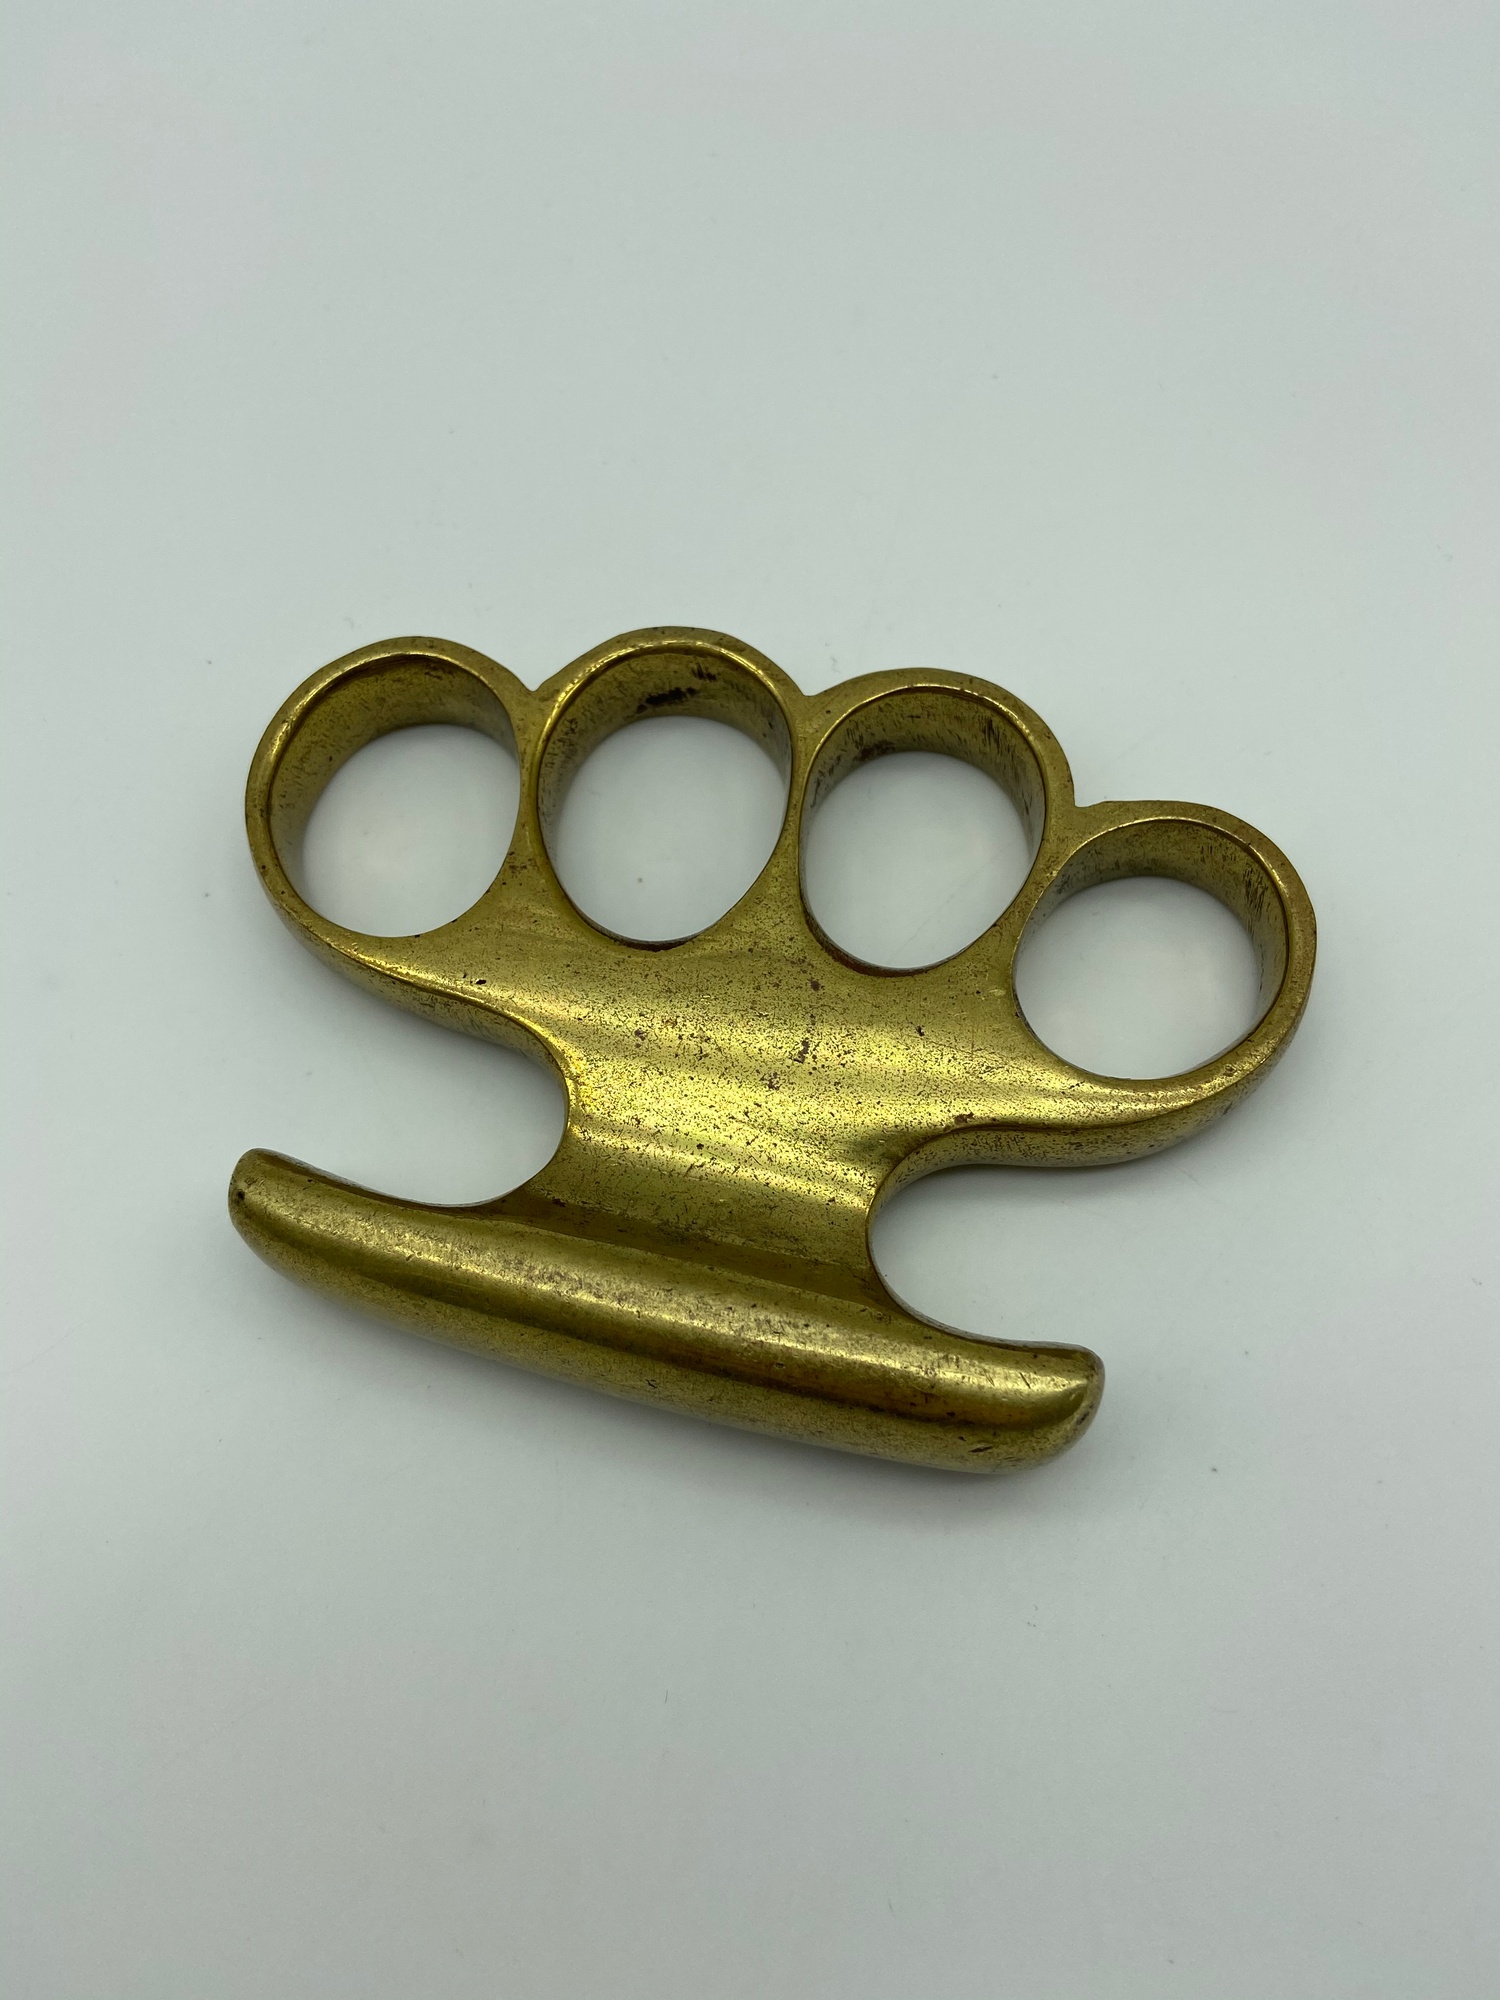 Antique heavy brass Knuckle duster